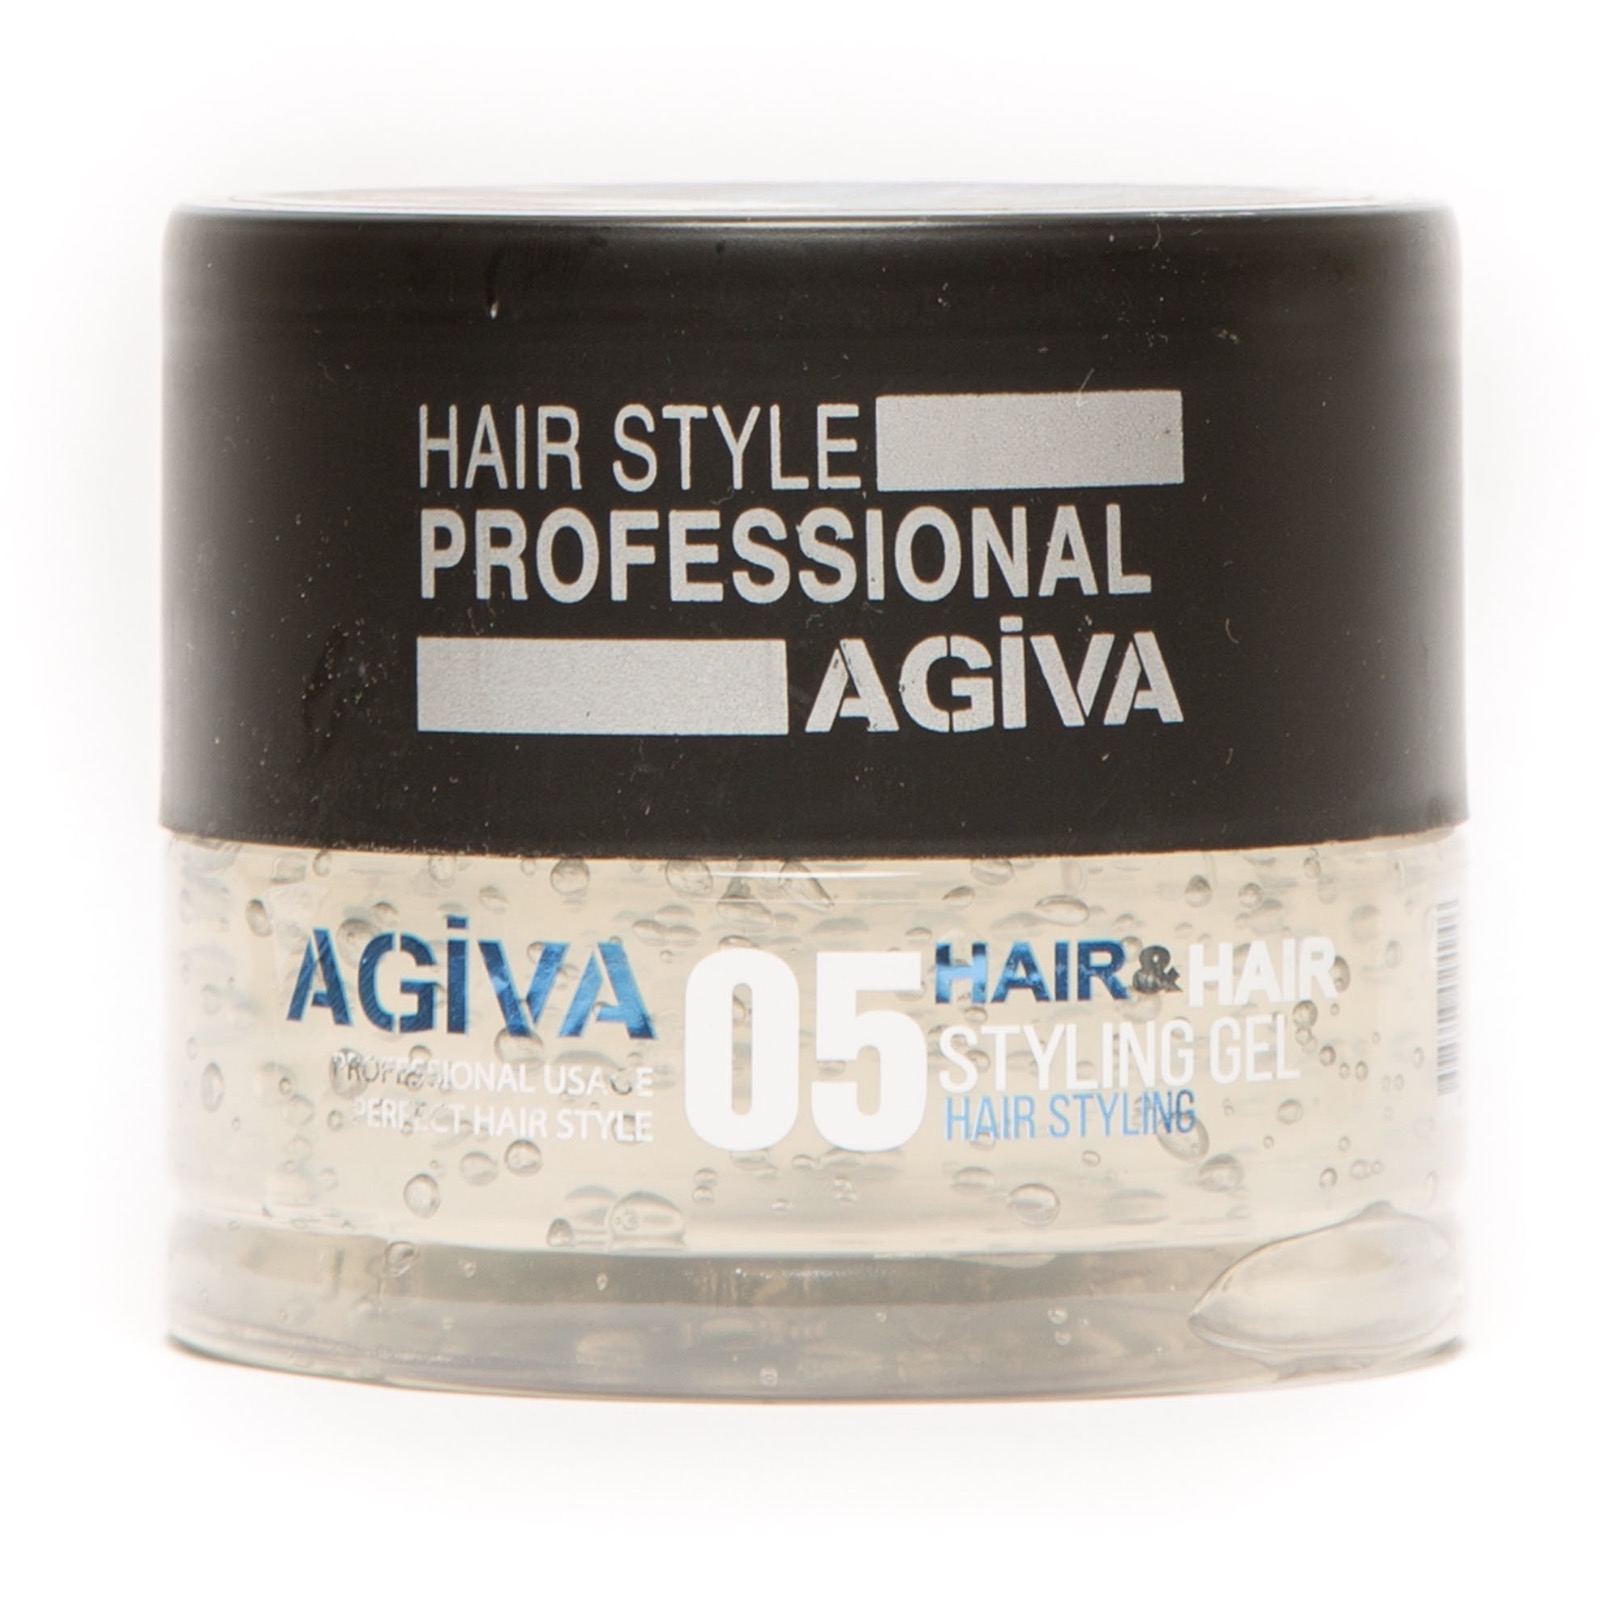 AGIVA Hair Styling Clear Gel 05 Wet Look Strong Hold 700 ml